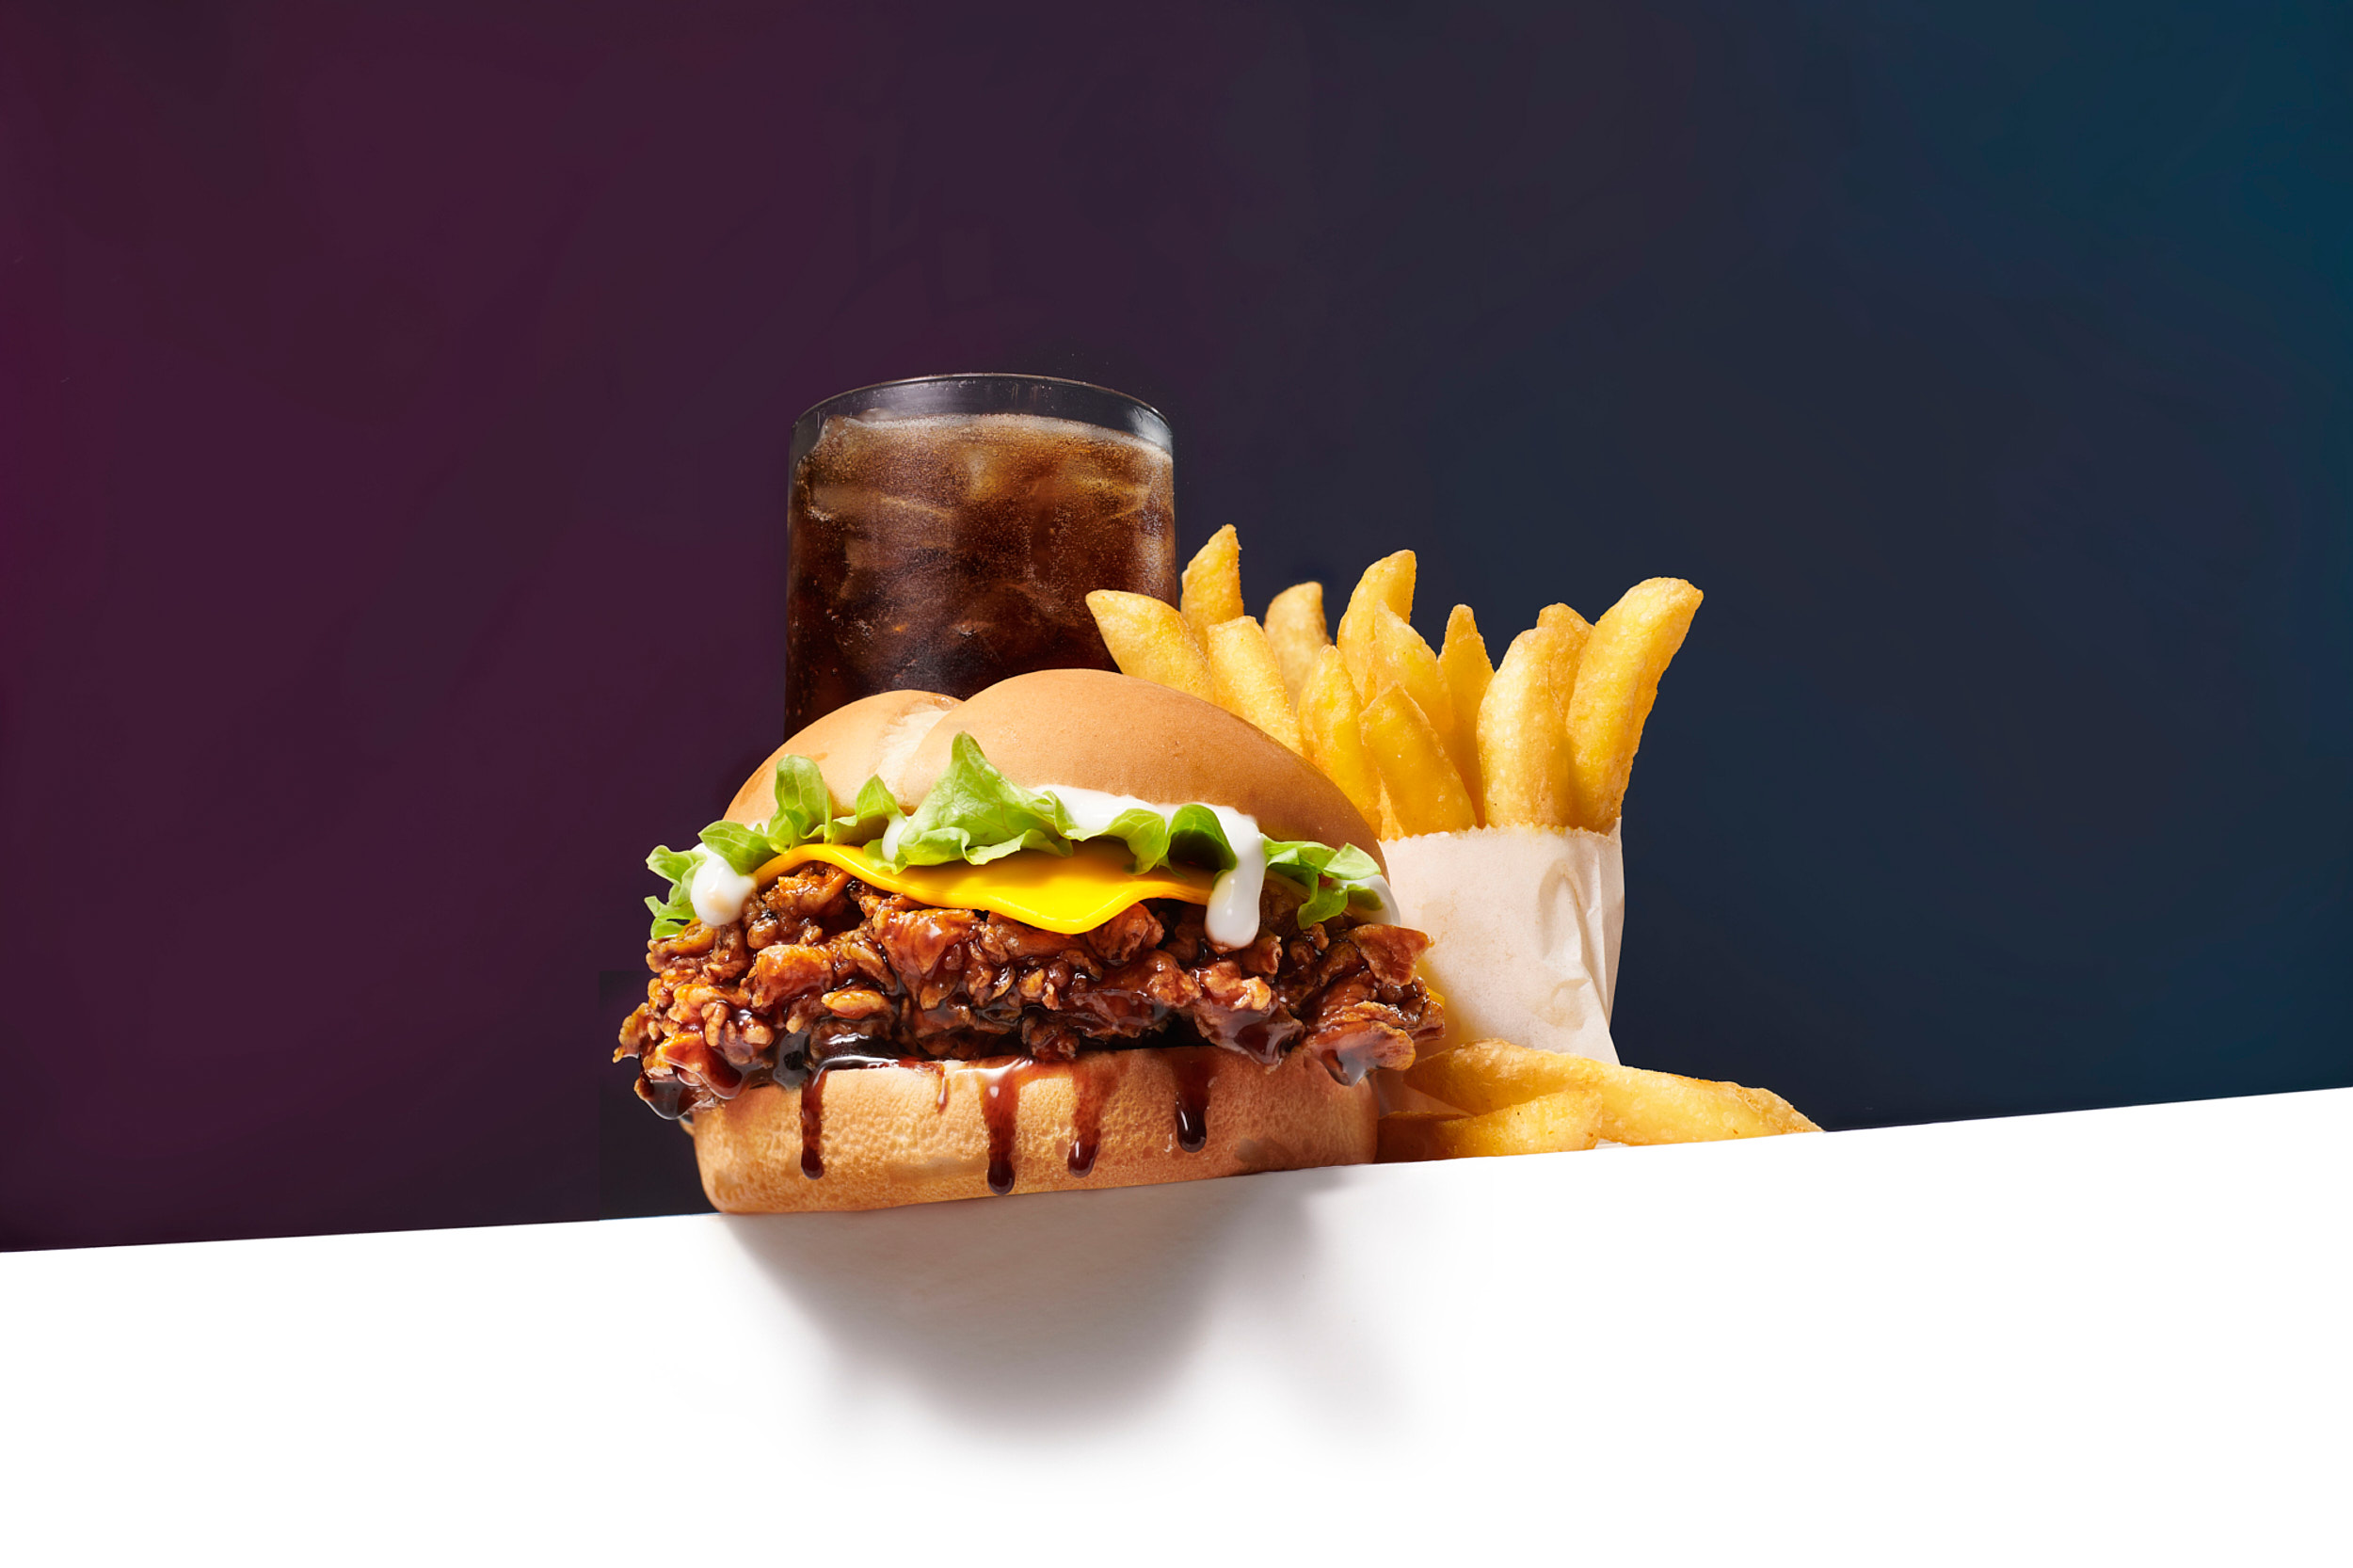 KFC_RSA_INTOTO_Day09_Contextual_DunkedBurger_Chips_Plate_Stacked1